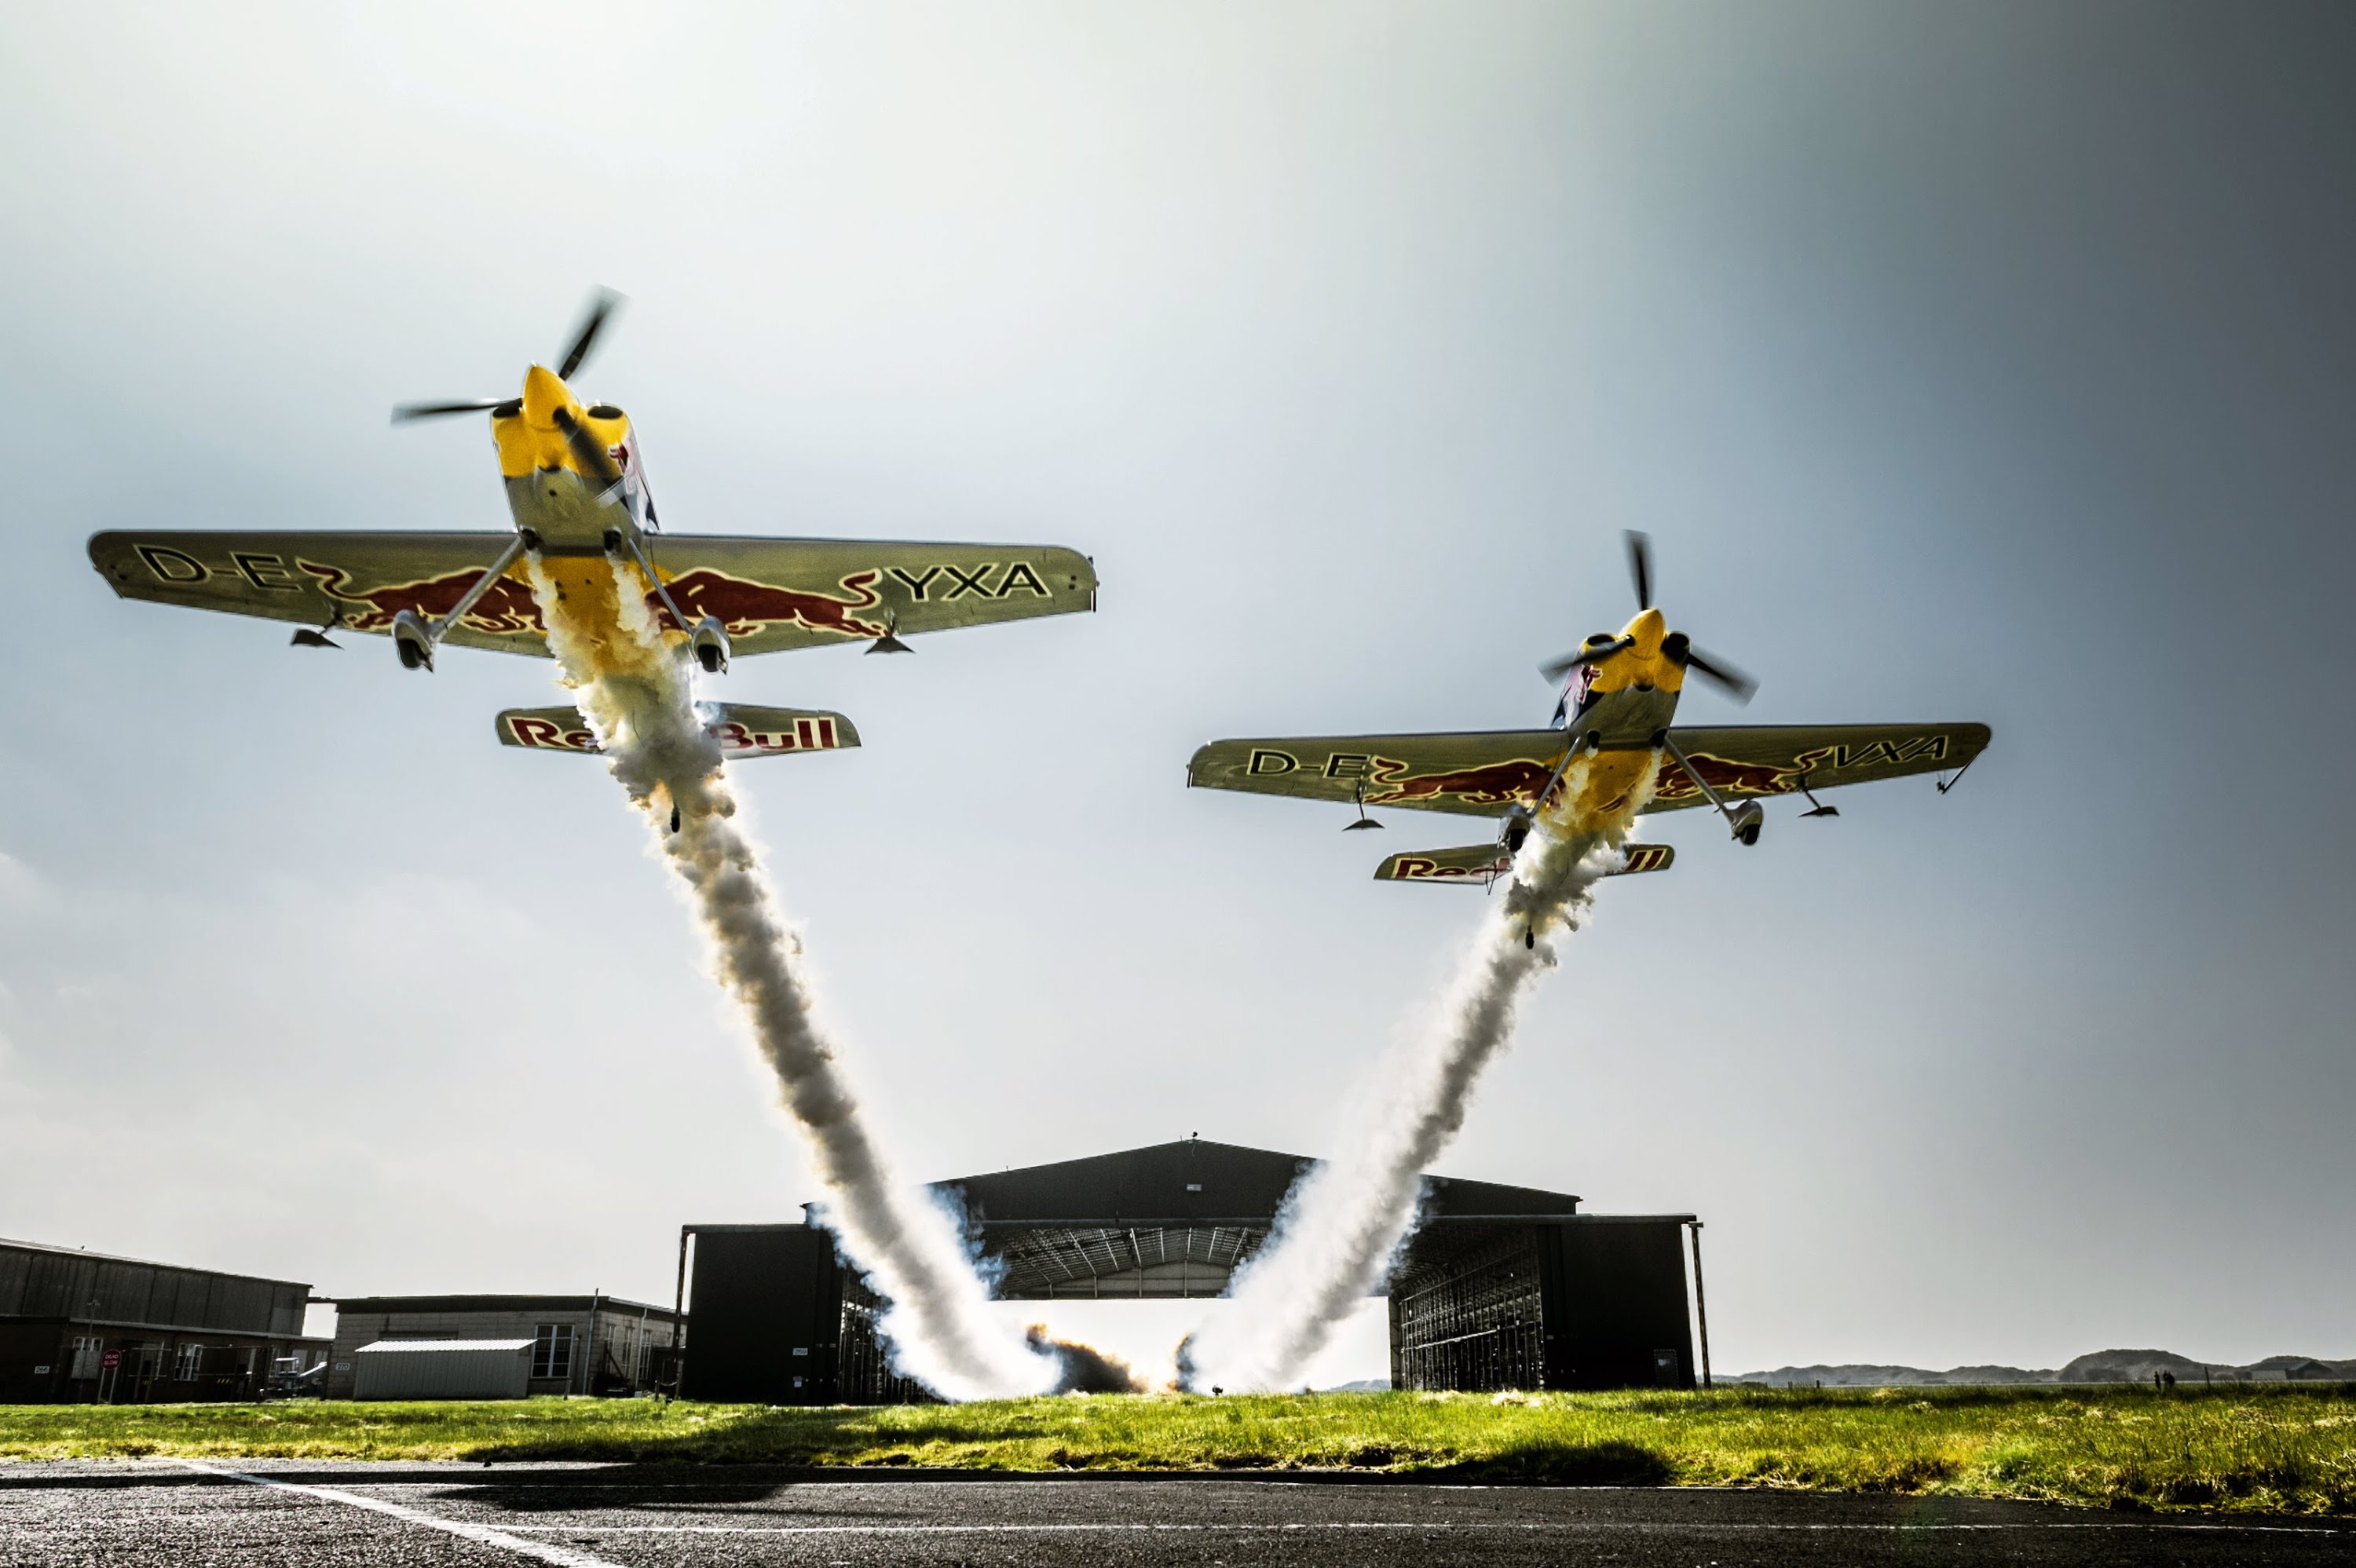 Death-defying Stunt: Two planes fly side-by-side through hangar in ...